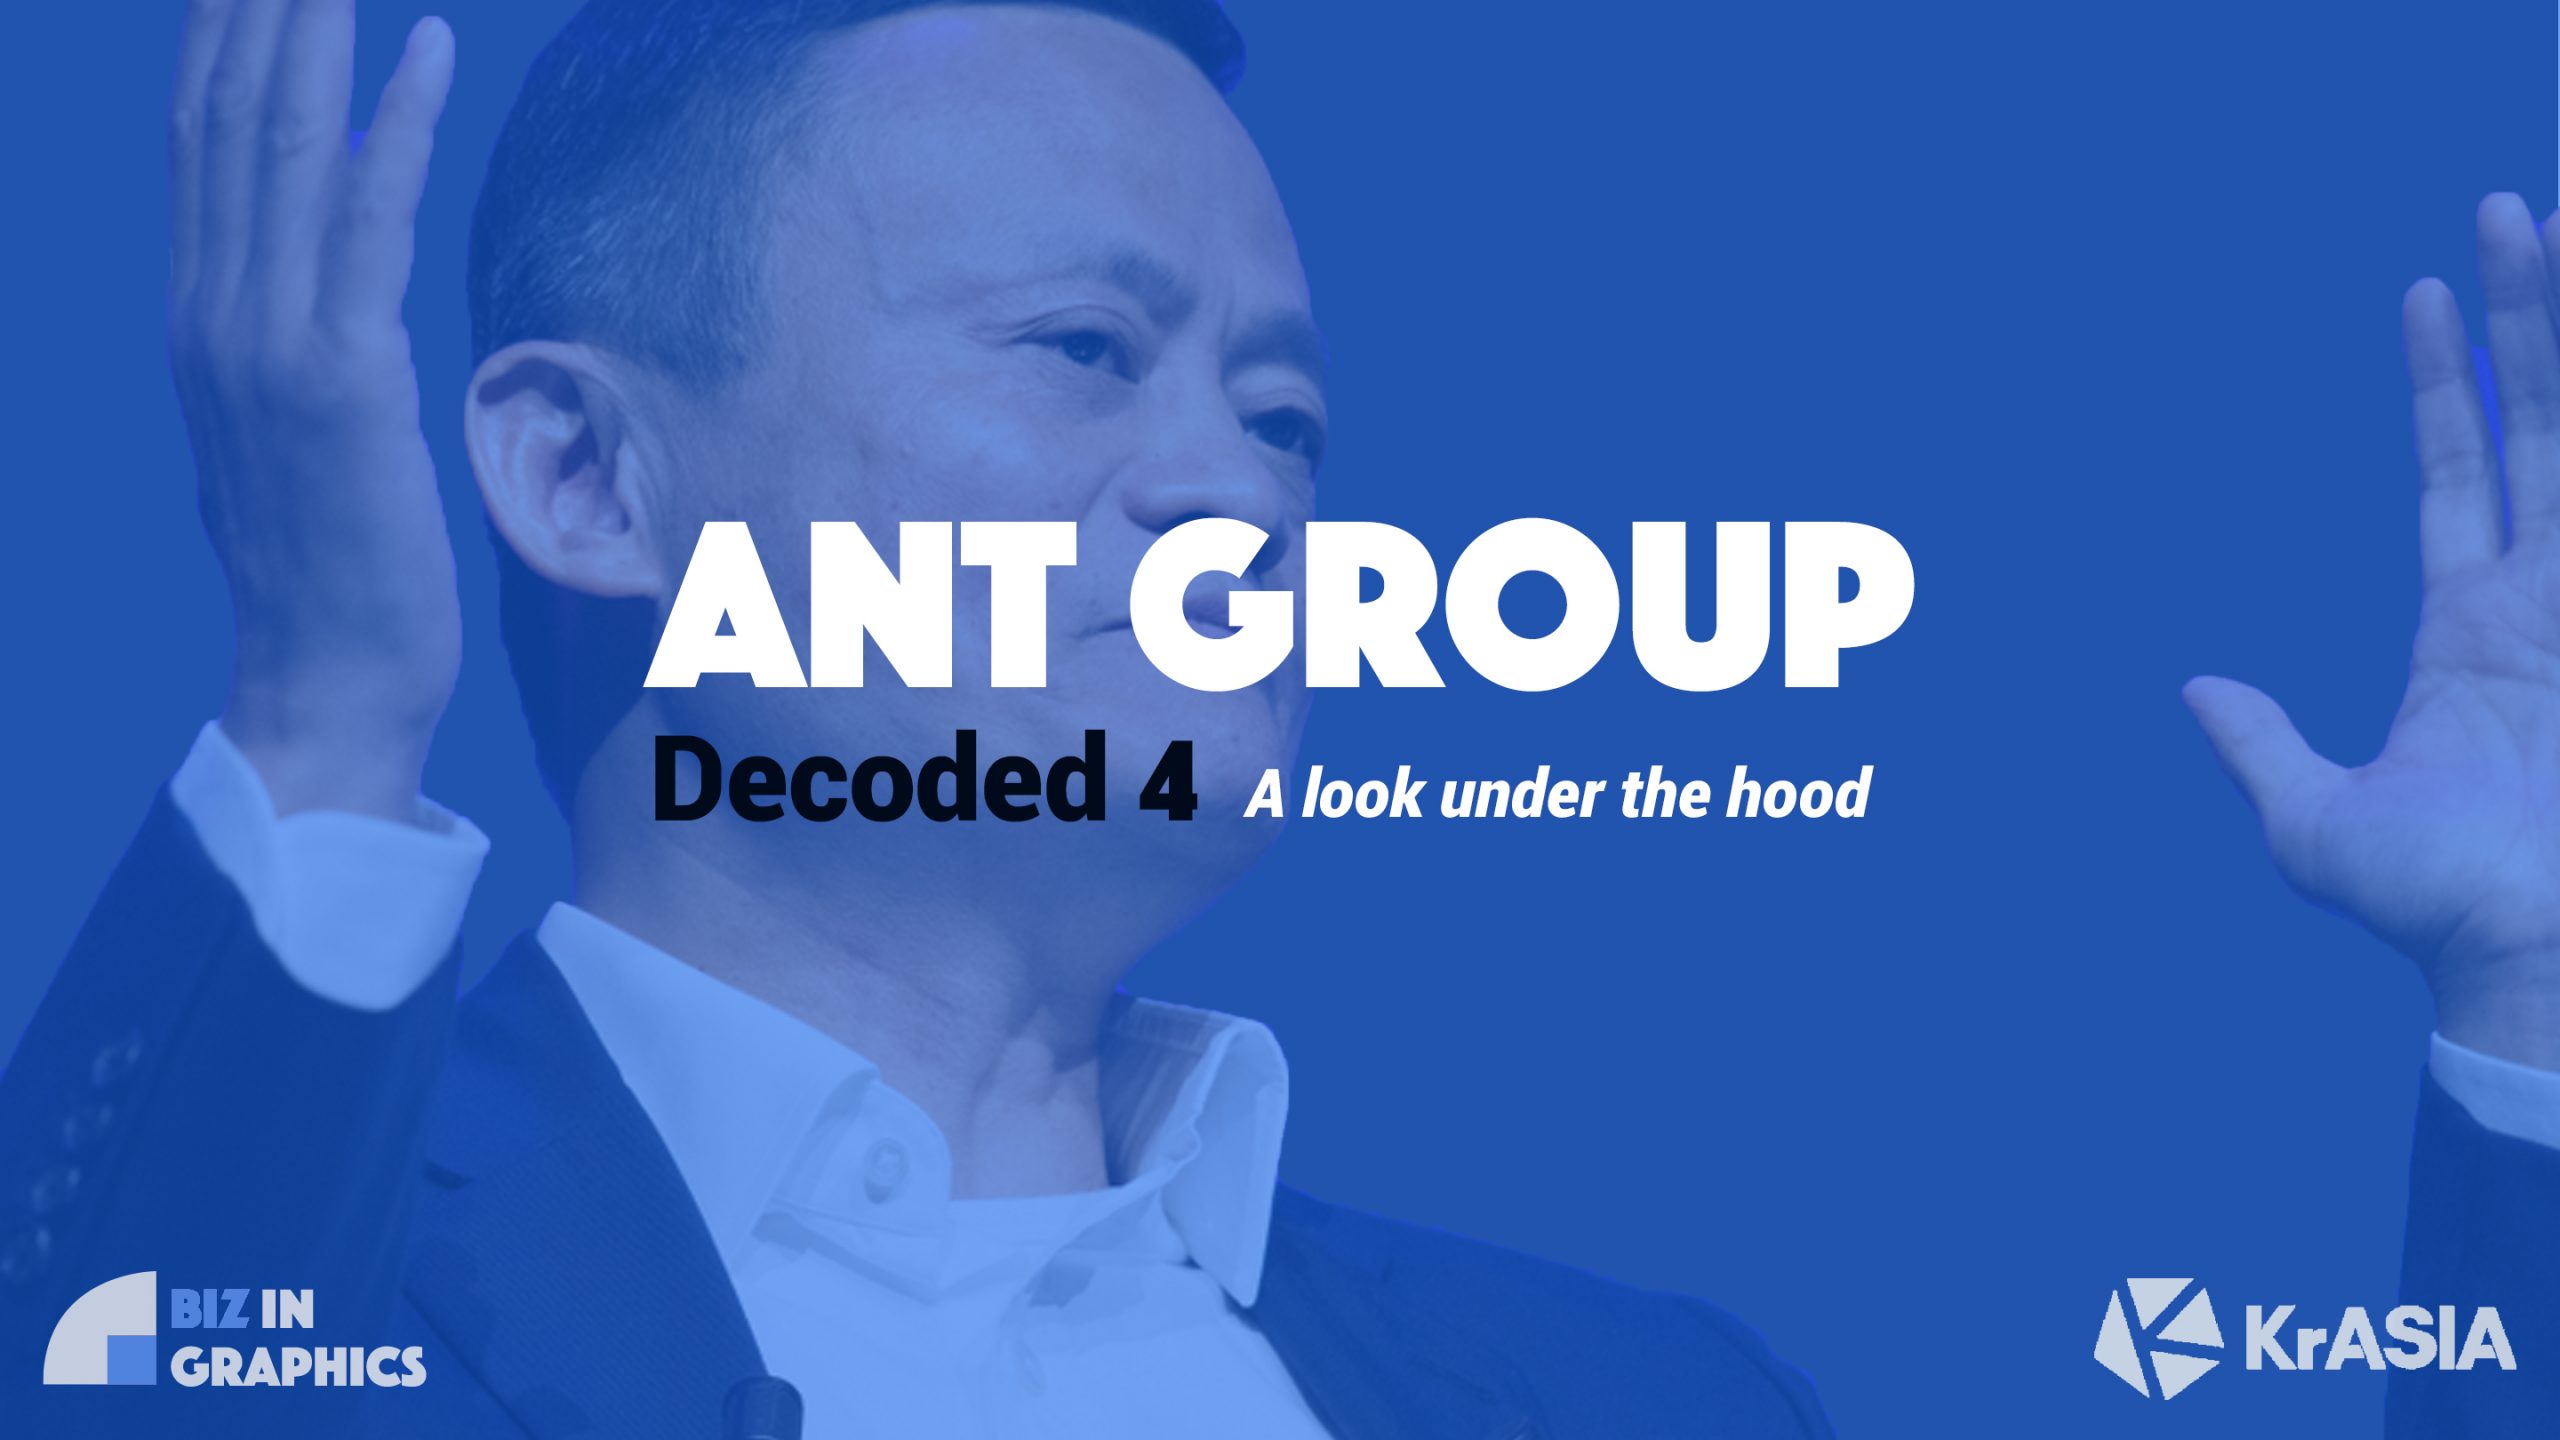 BIZ IN GRAPHICS | Ant Group’s business logic, advantages, and ‘small’ customers